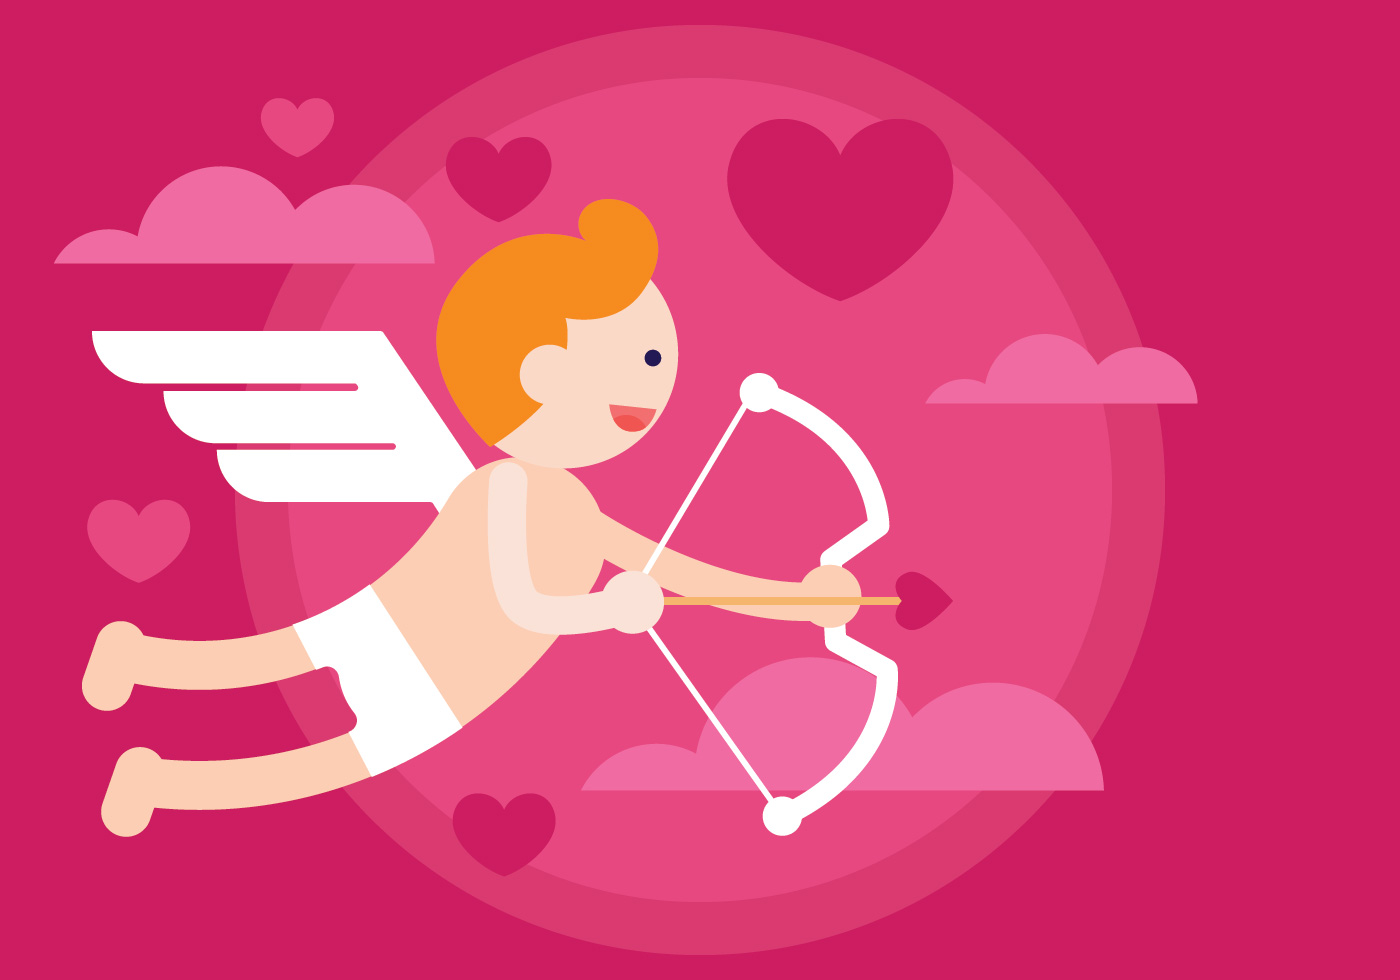 Download the Cupid Vector Illustration 268830